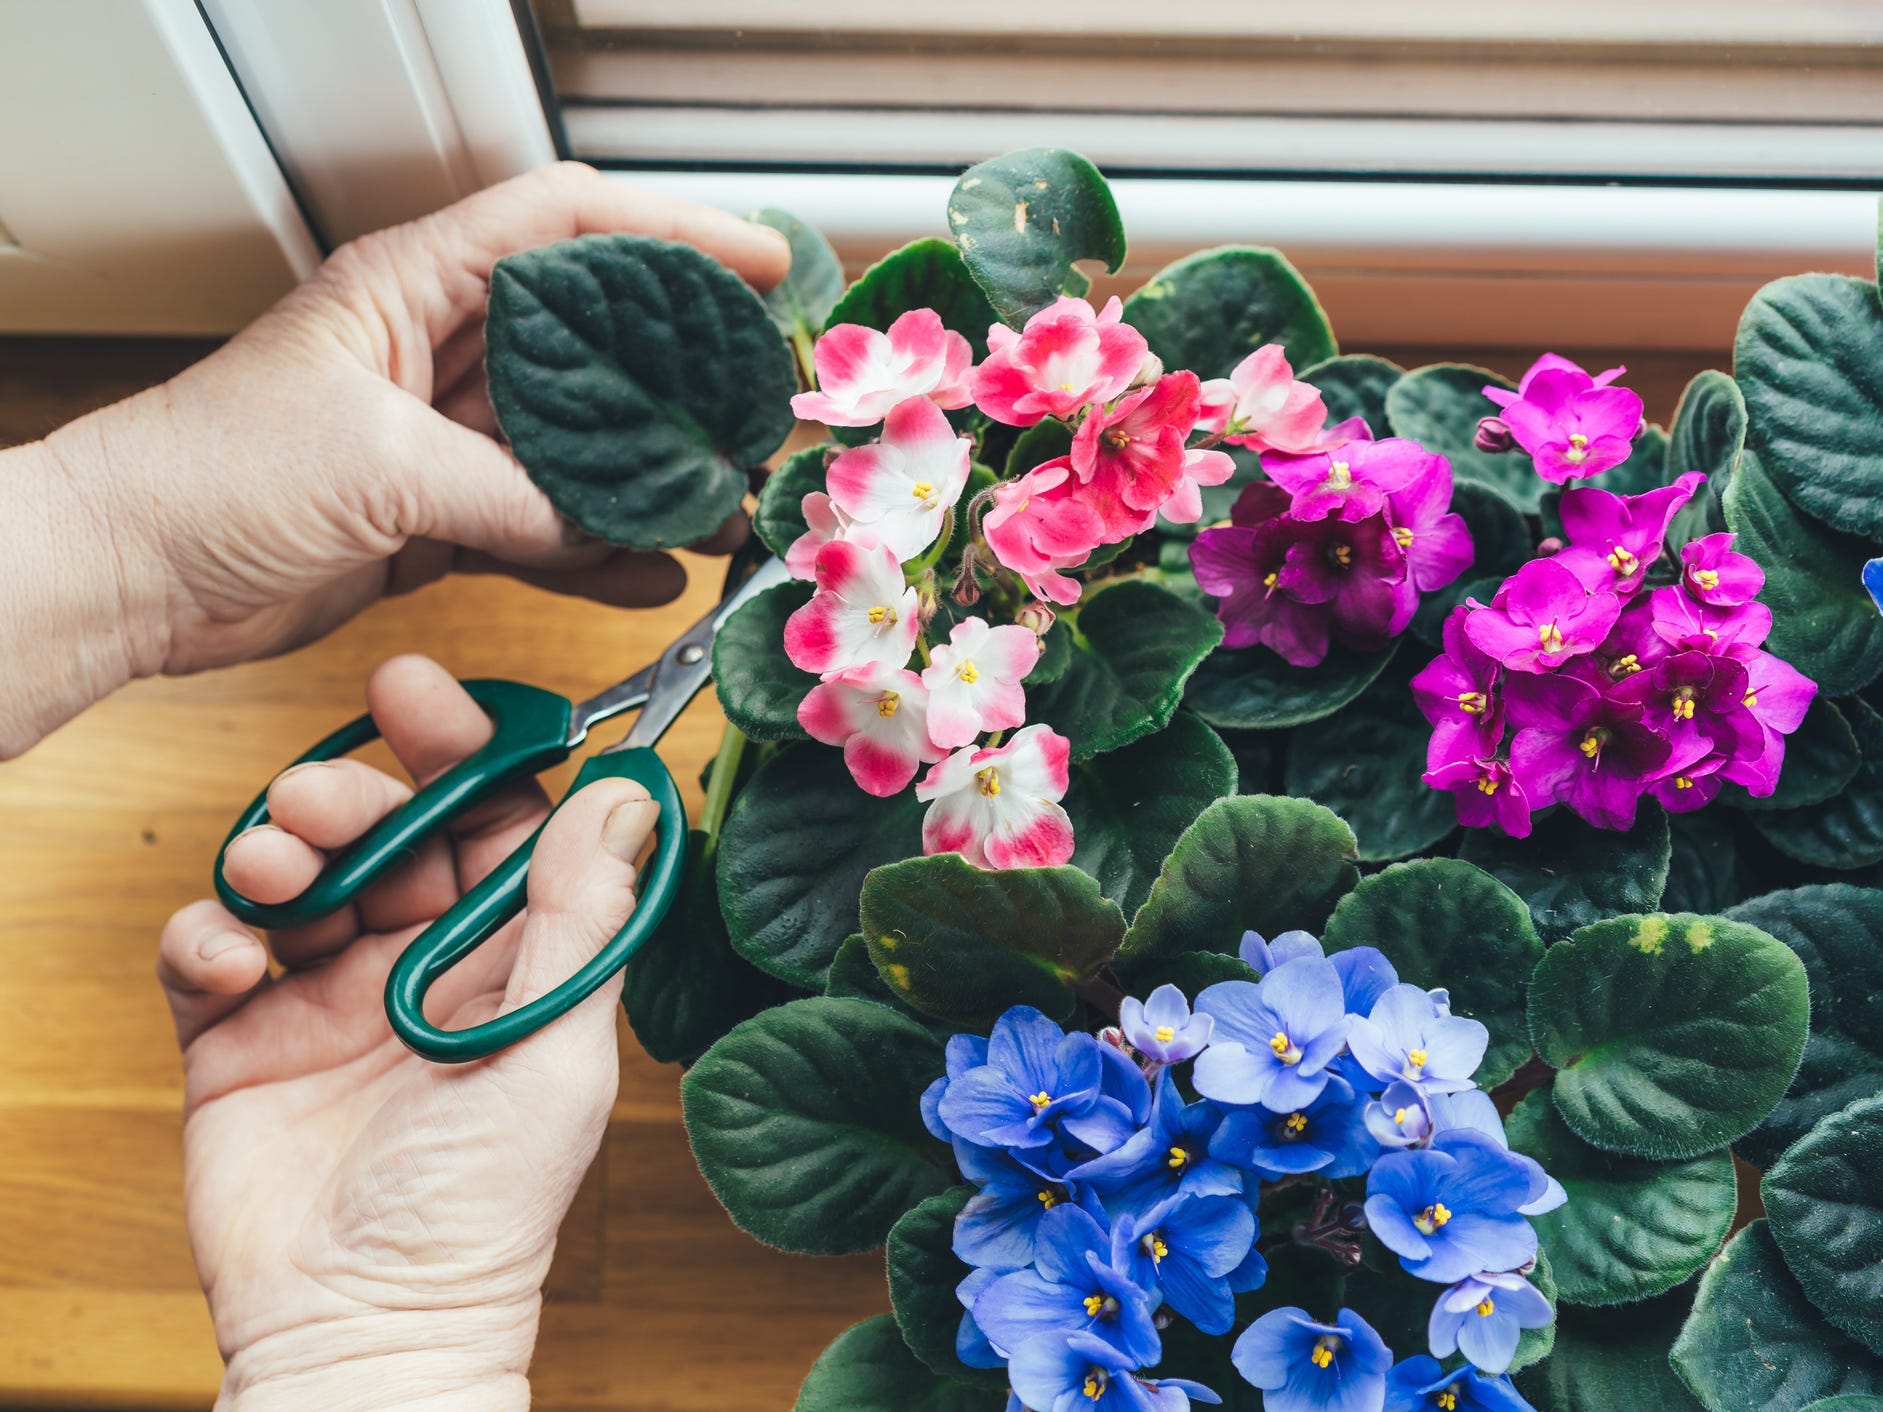 Pruning a leaf from an African violet plant